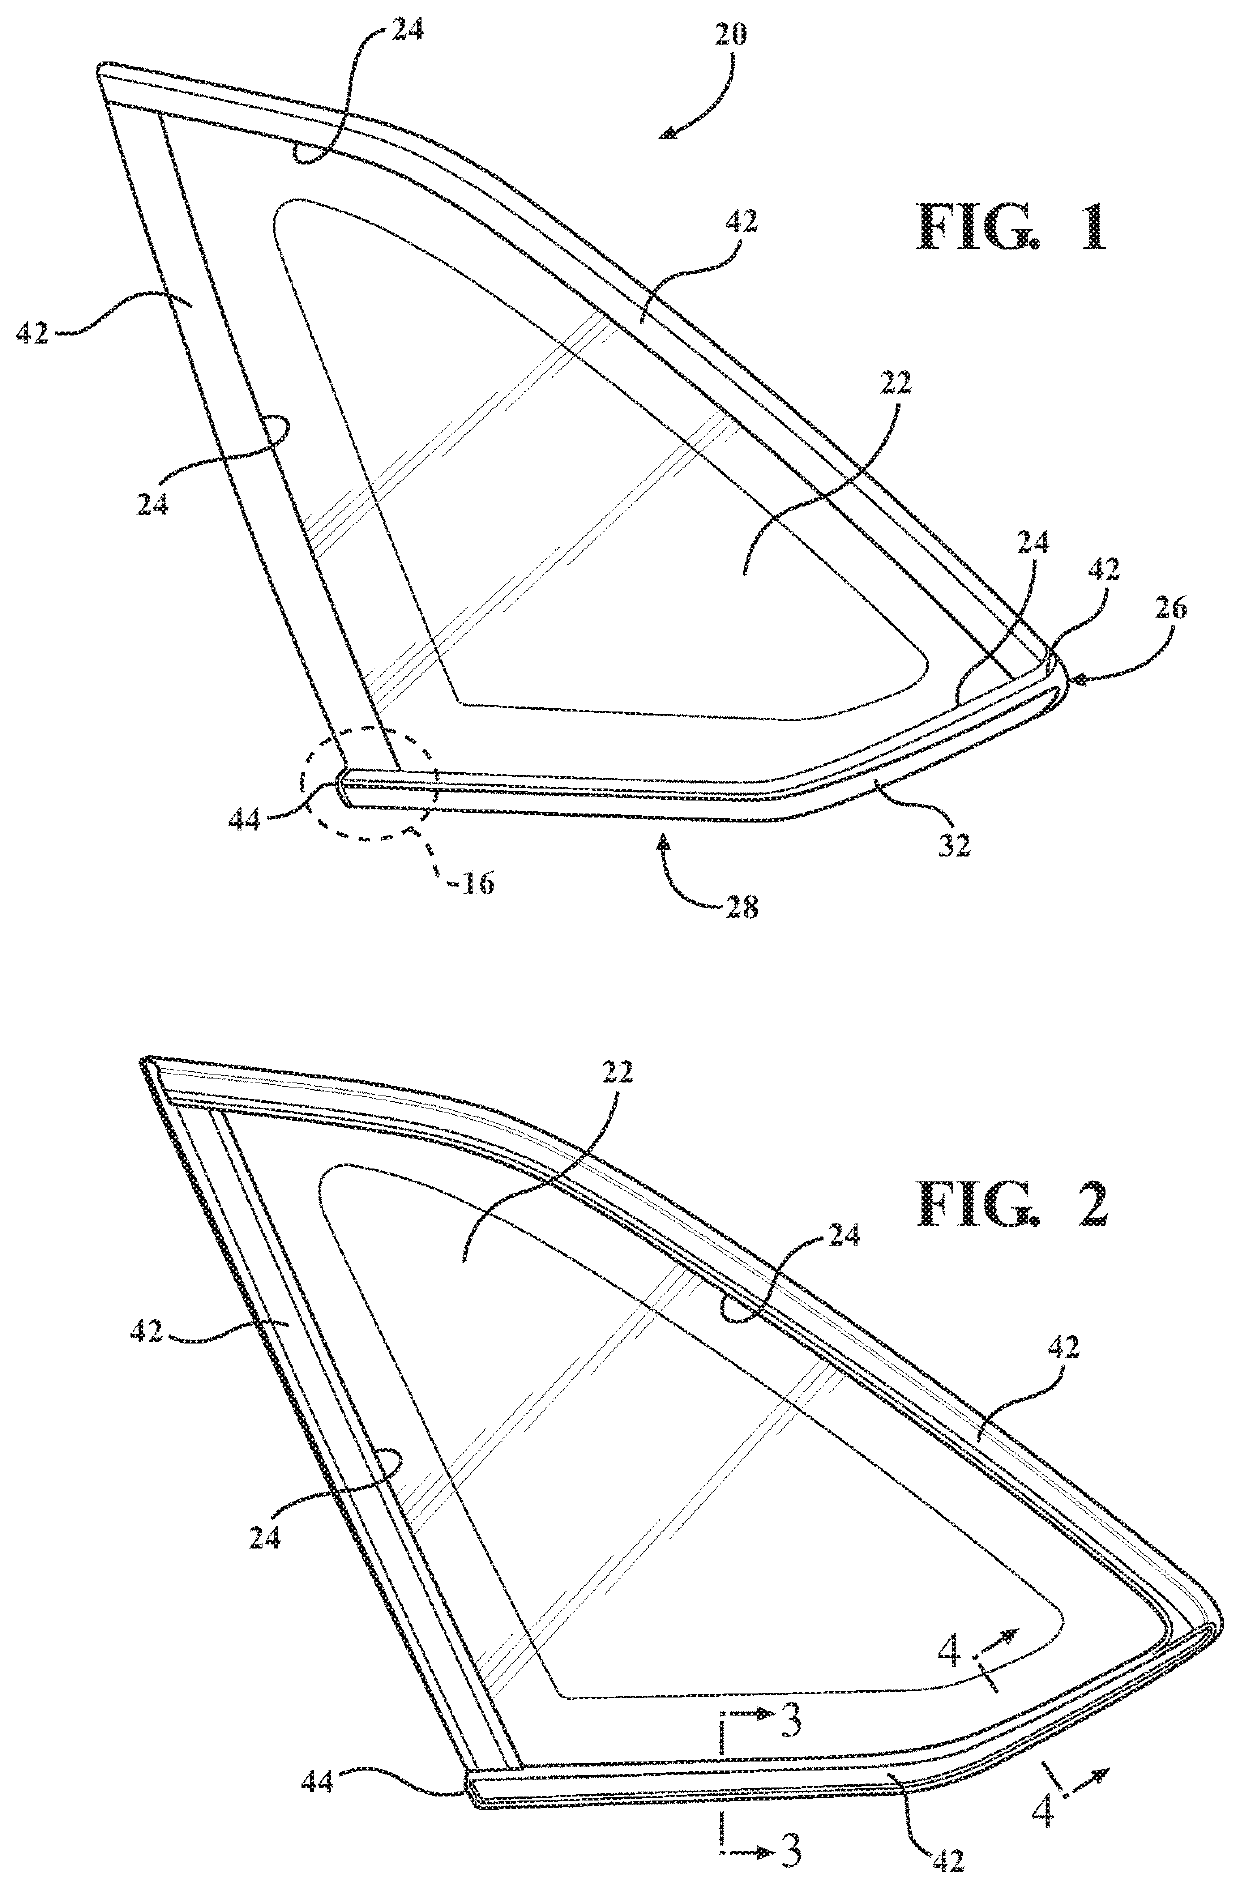 Fixed window assembly for a vehicle and method of manufacturing same